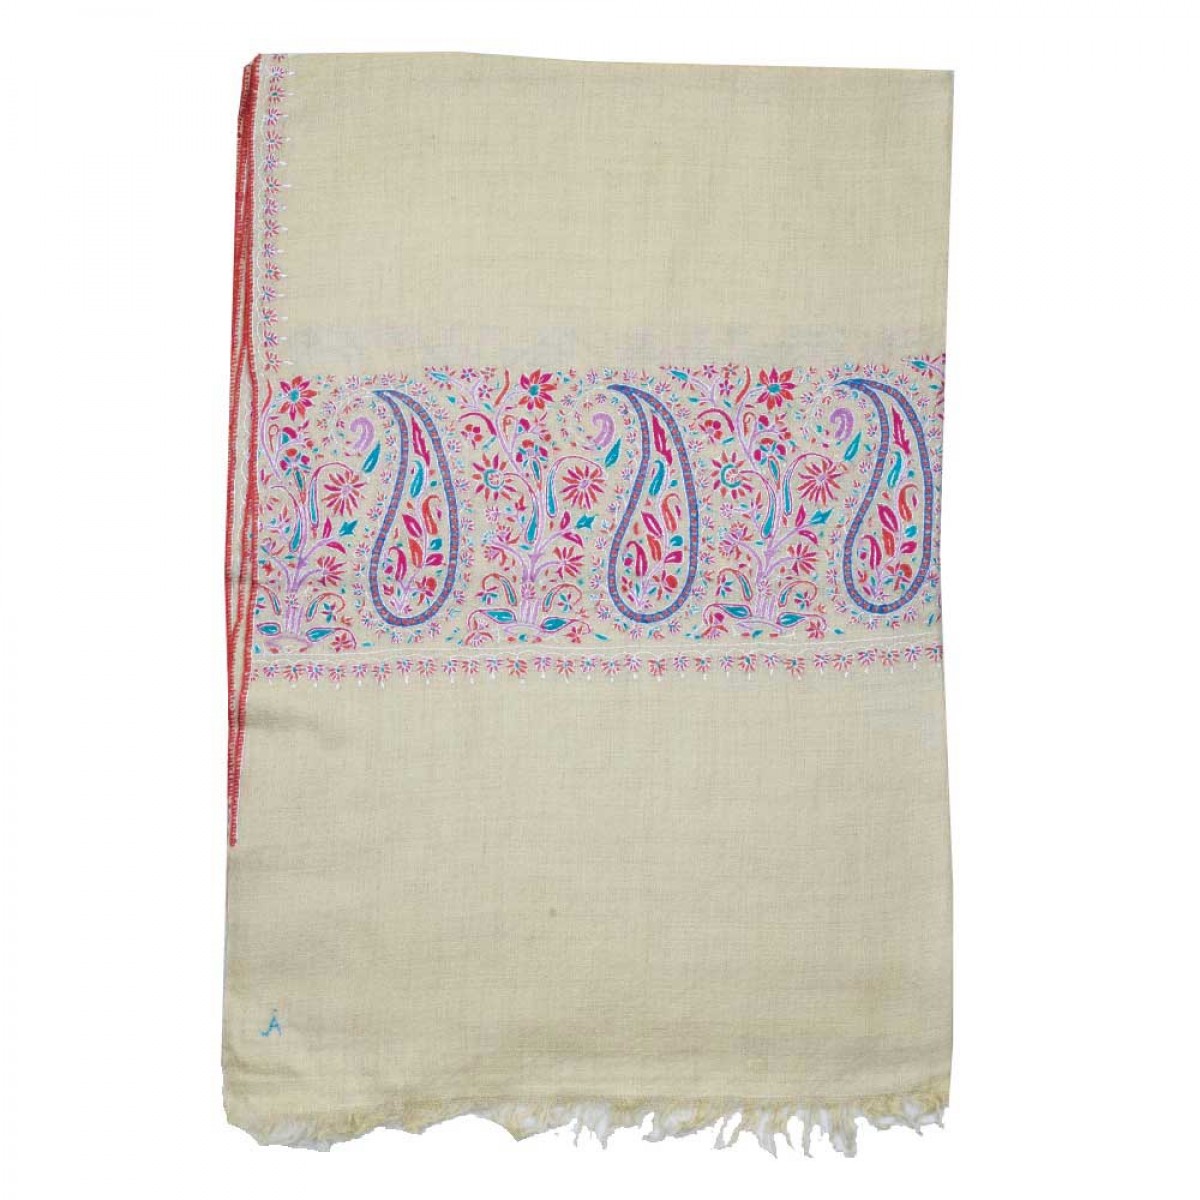 Embroidered Pashmina Stole - Natural & Paisley 